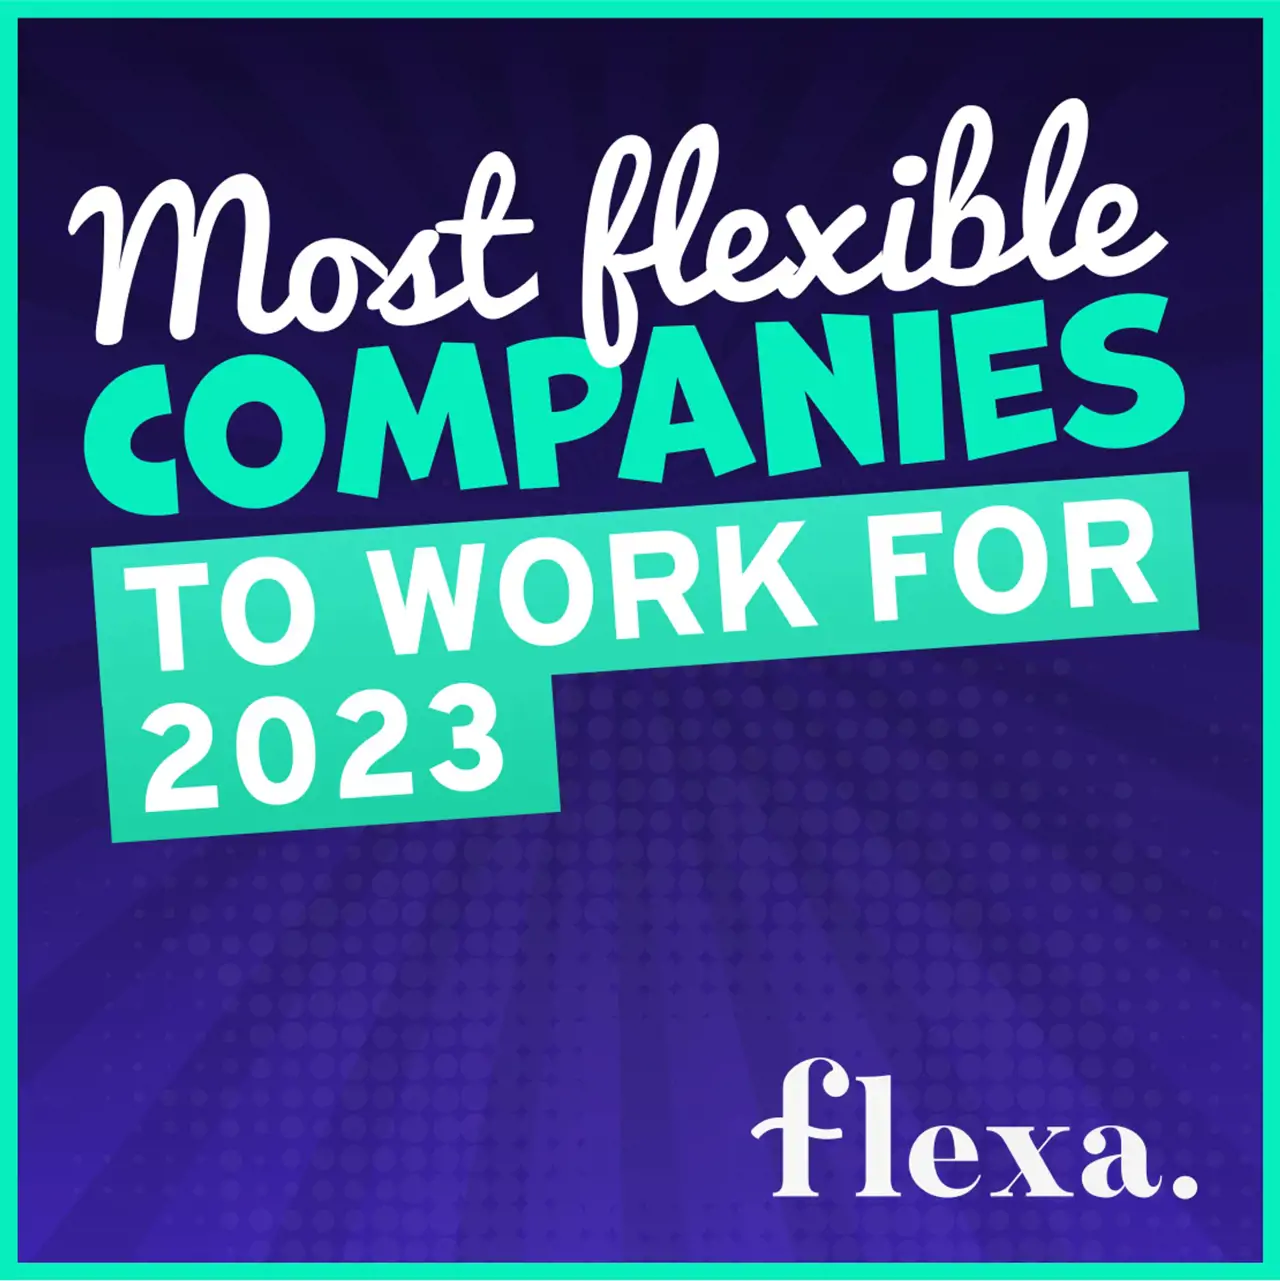 Most flexible companies to work for 2023 - Flexa